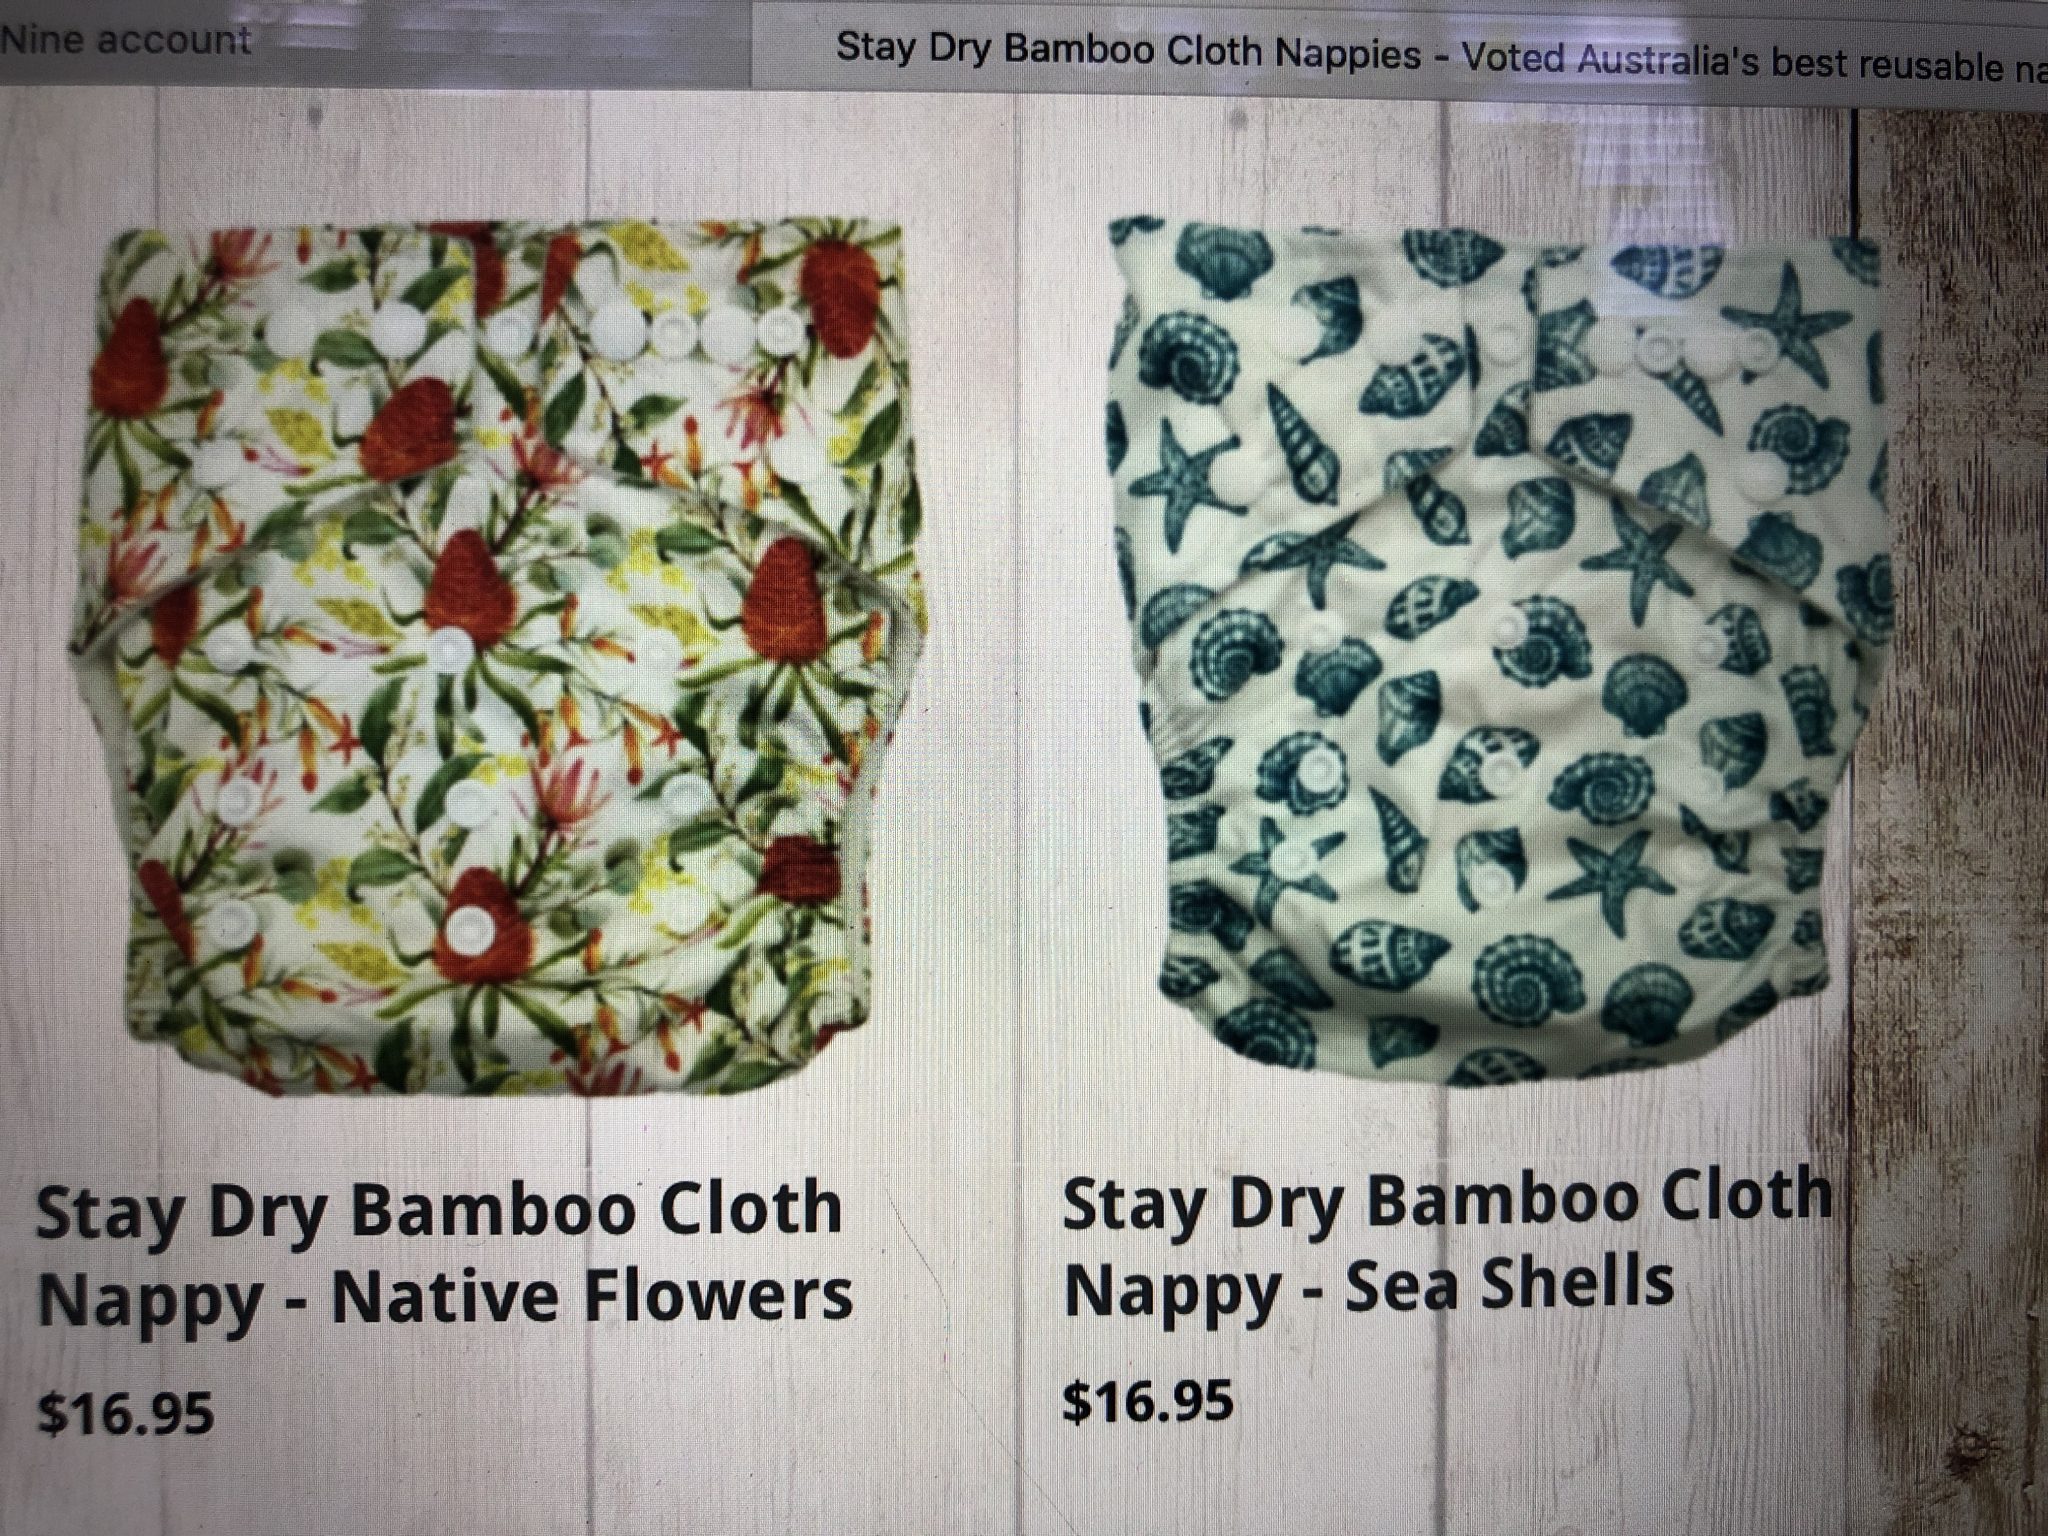 Stay Dry Bamboo Cloth Nappy